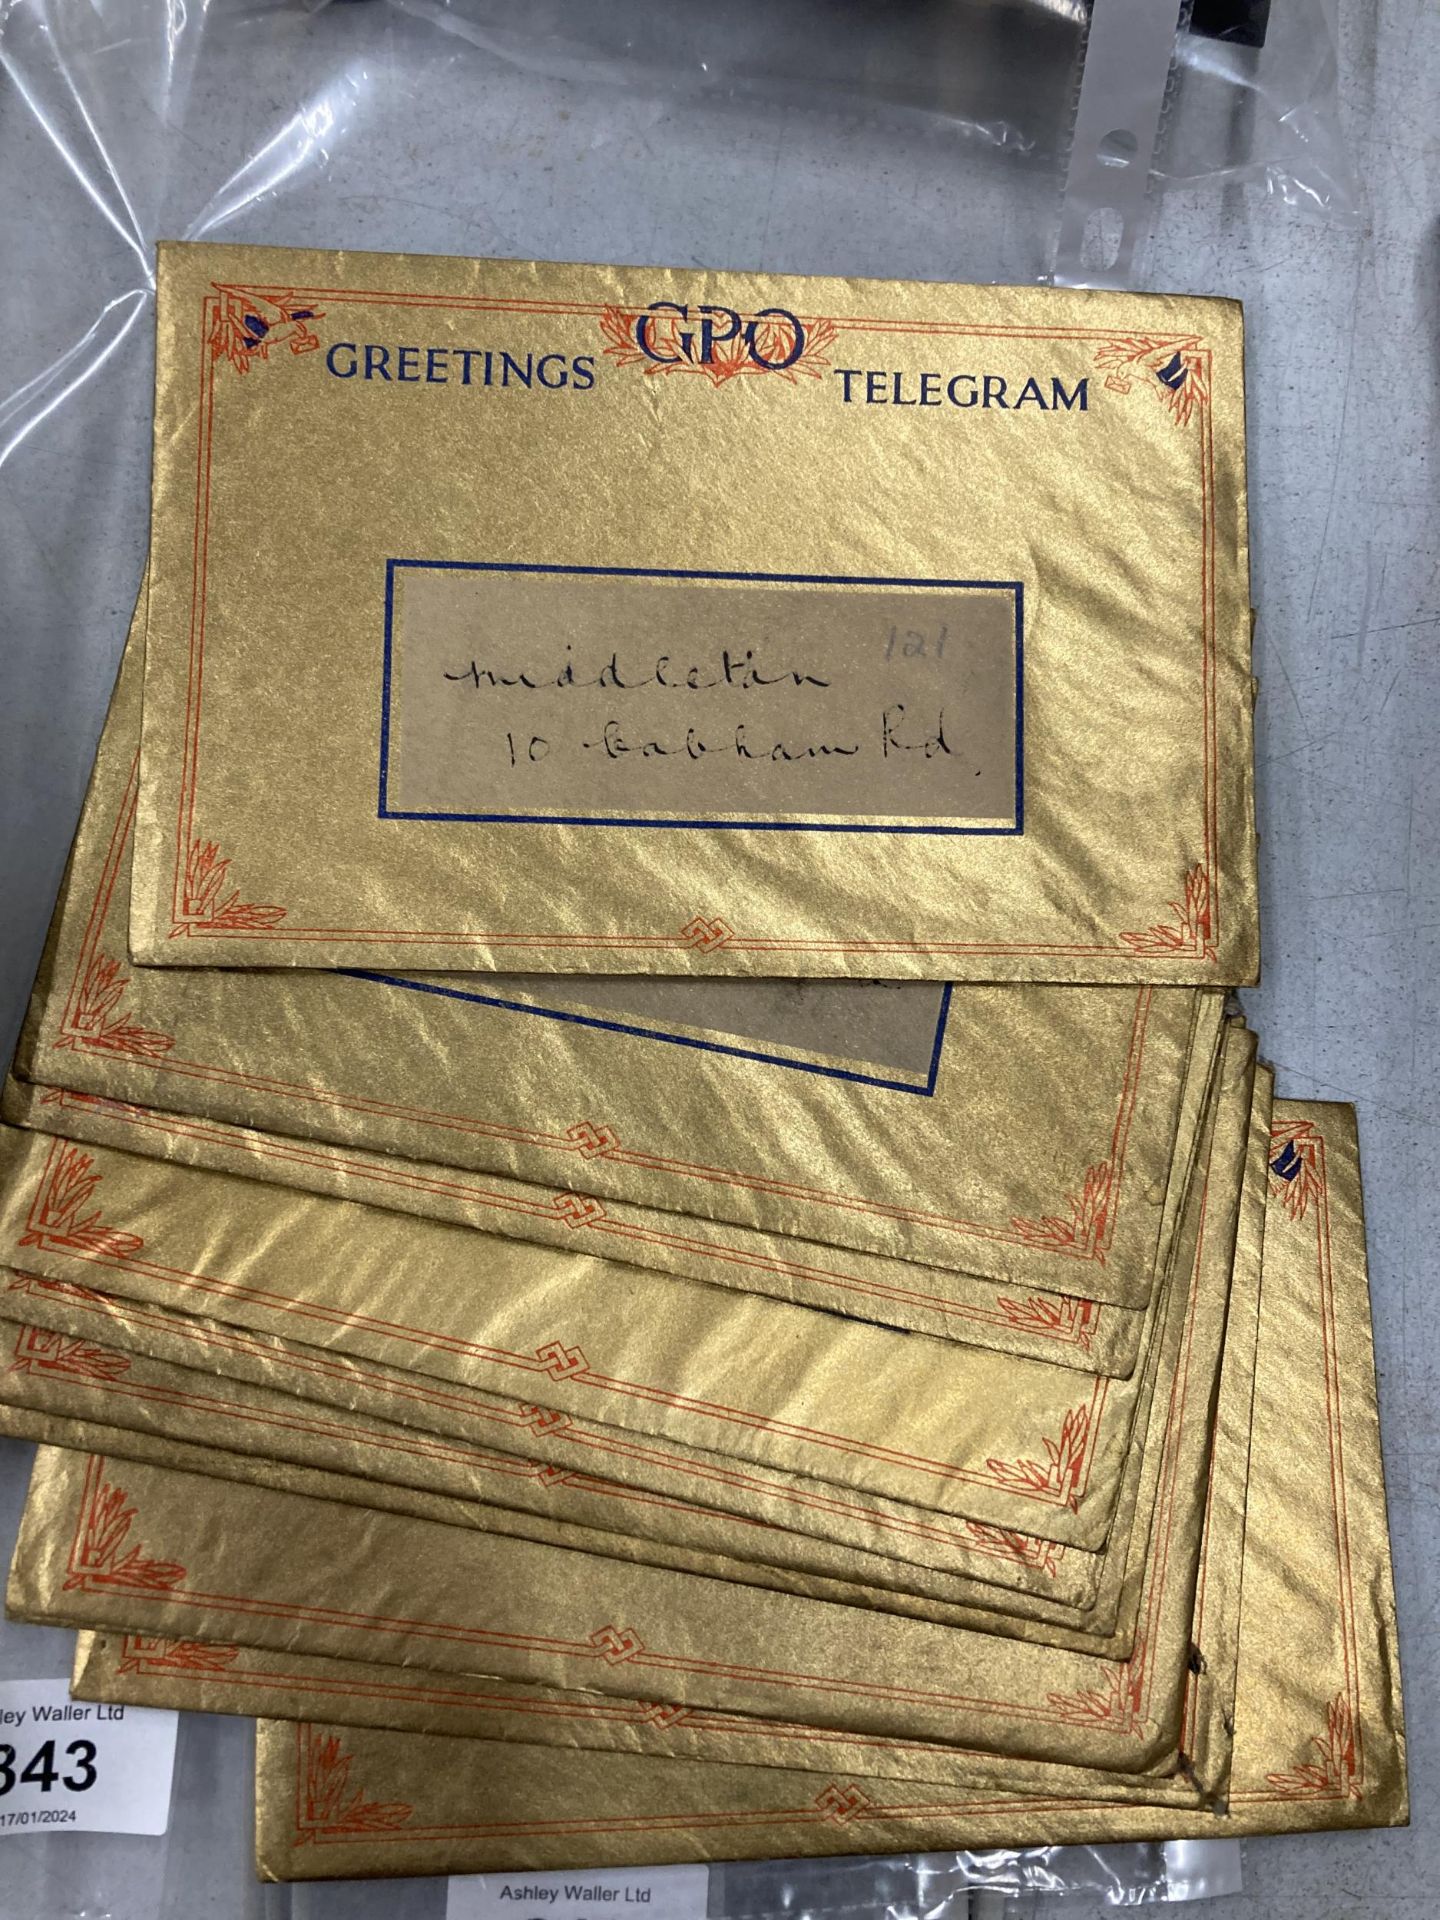 A COLLECTION OF 1930'S GPO GREETINGS TELEGRAMS